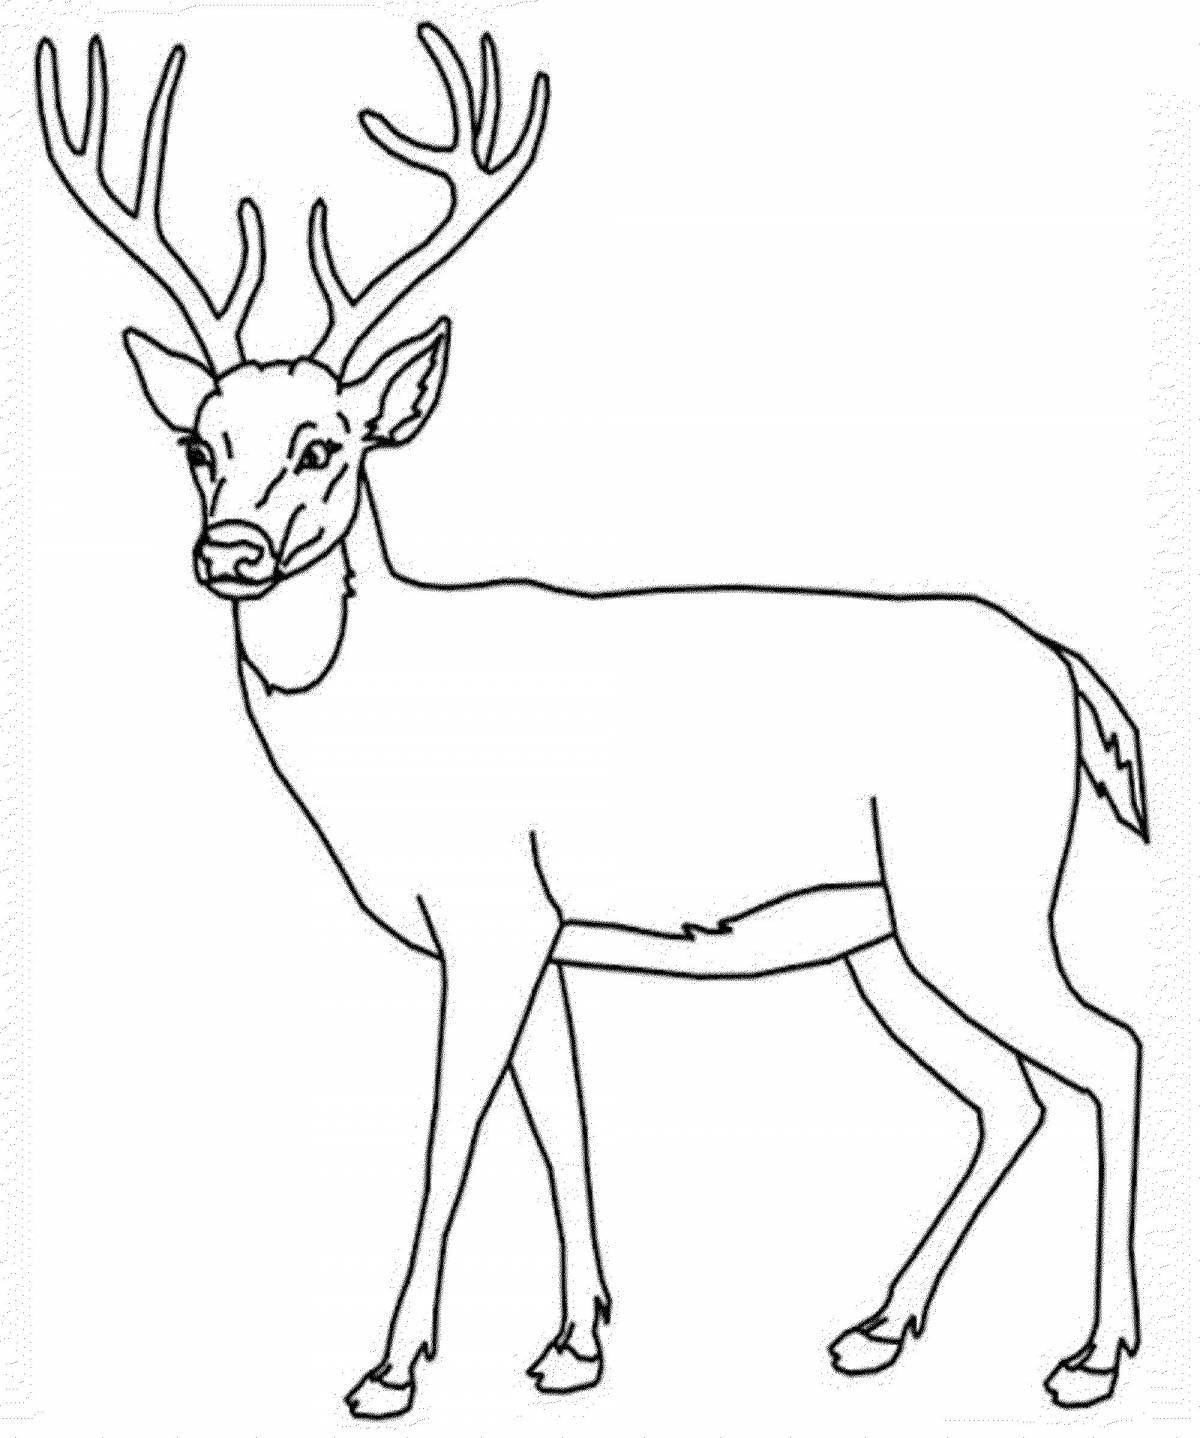 Magic deer coloring pages for kids